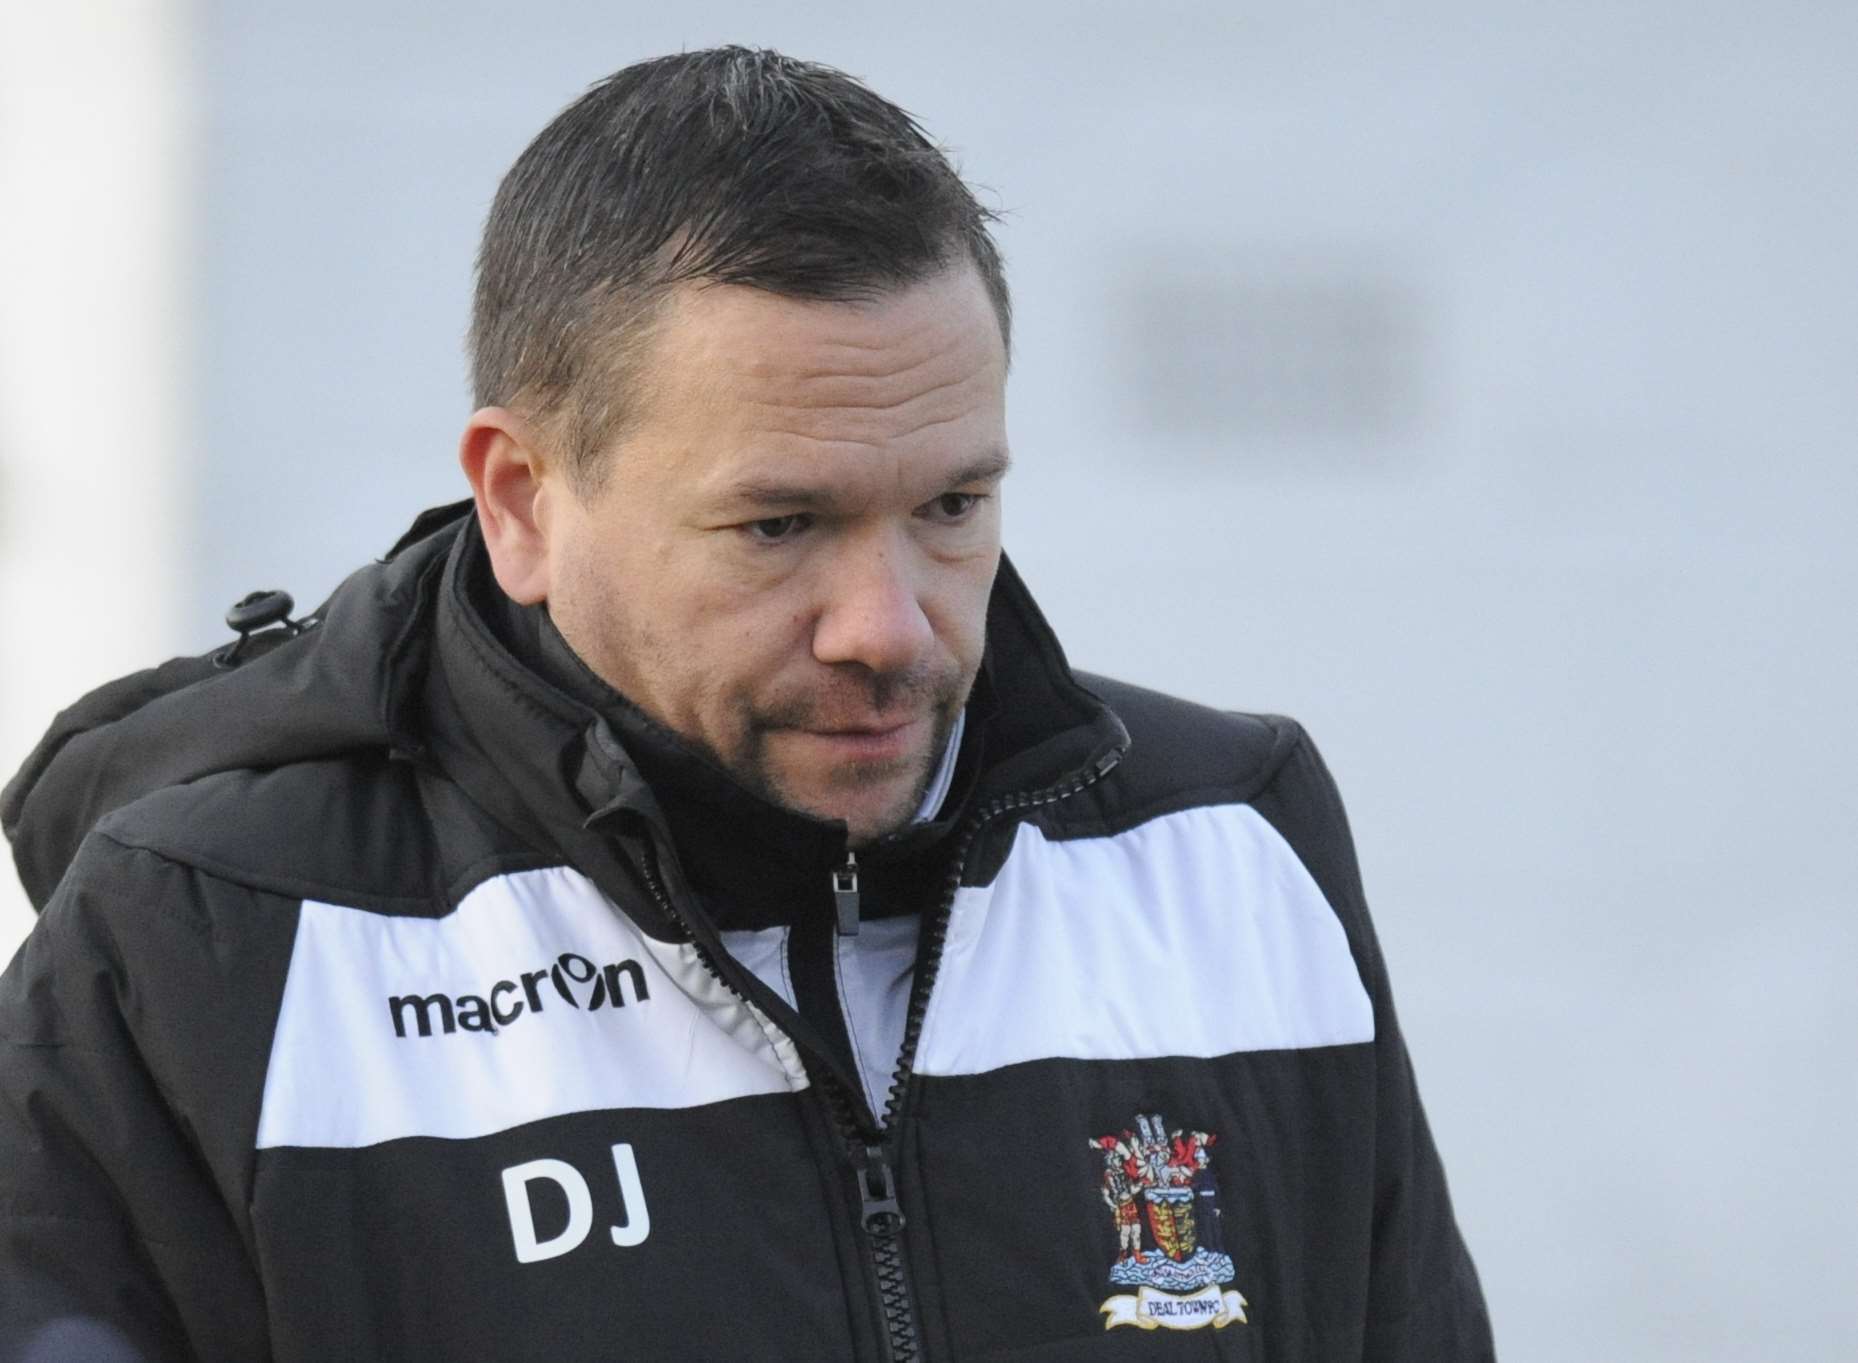 Deal Town caretaker boss Dave Johncock's reign was ended at a board meeting on Monday night. Picture: Tony Flashman